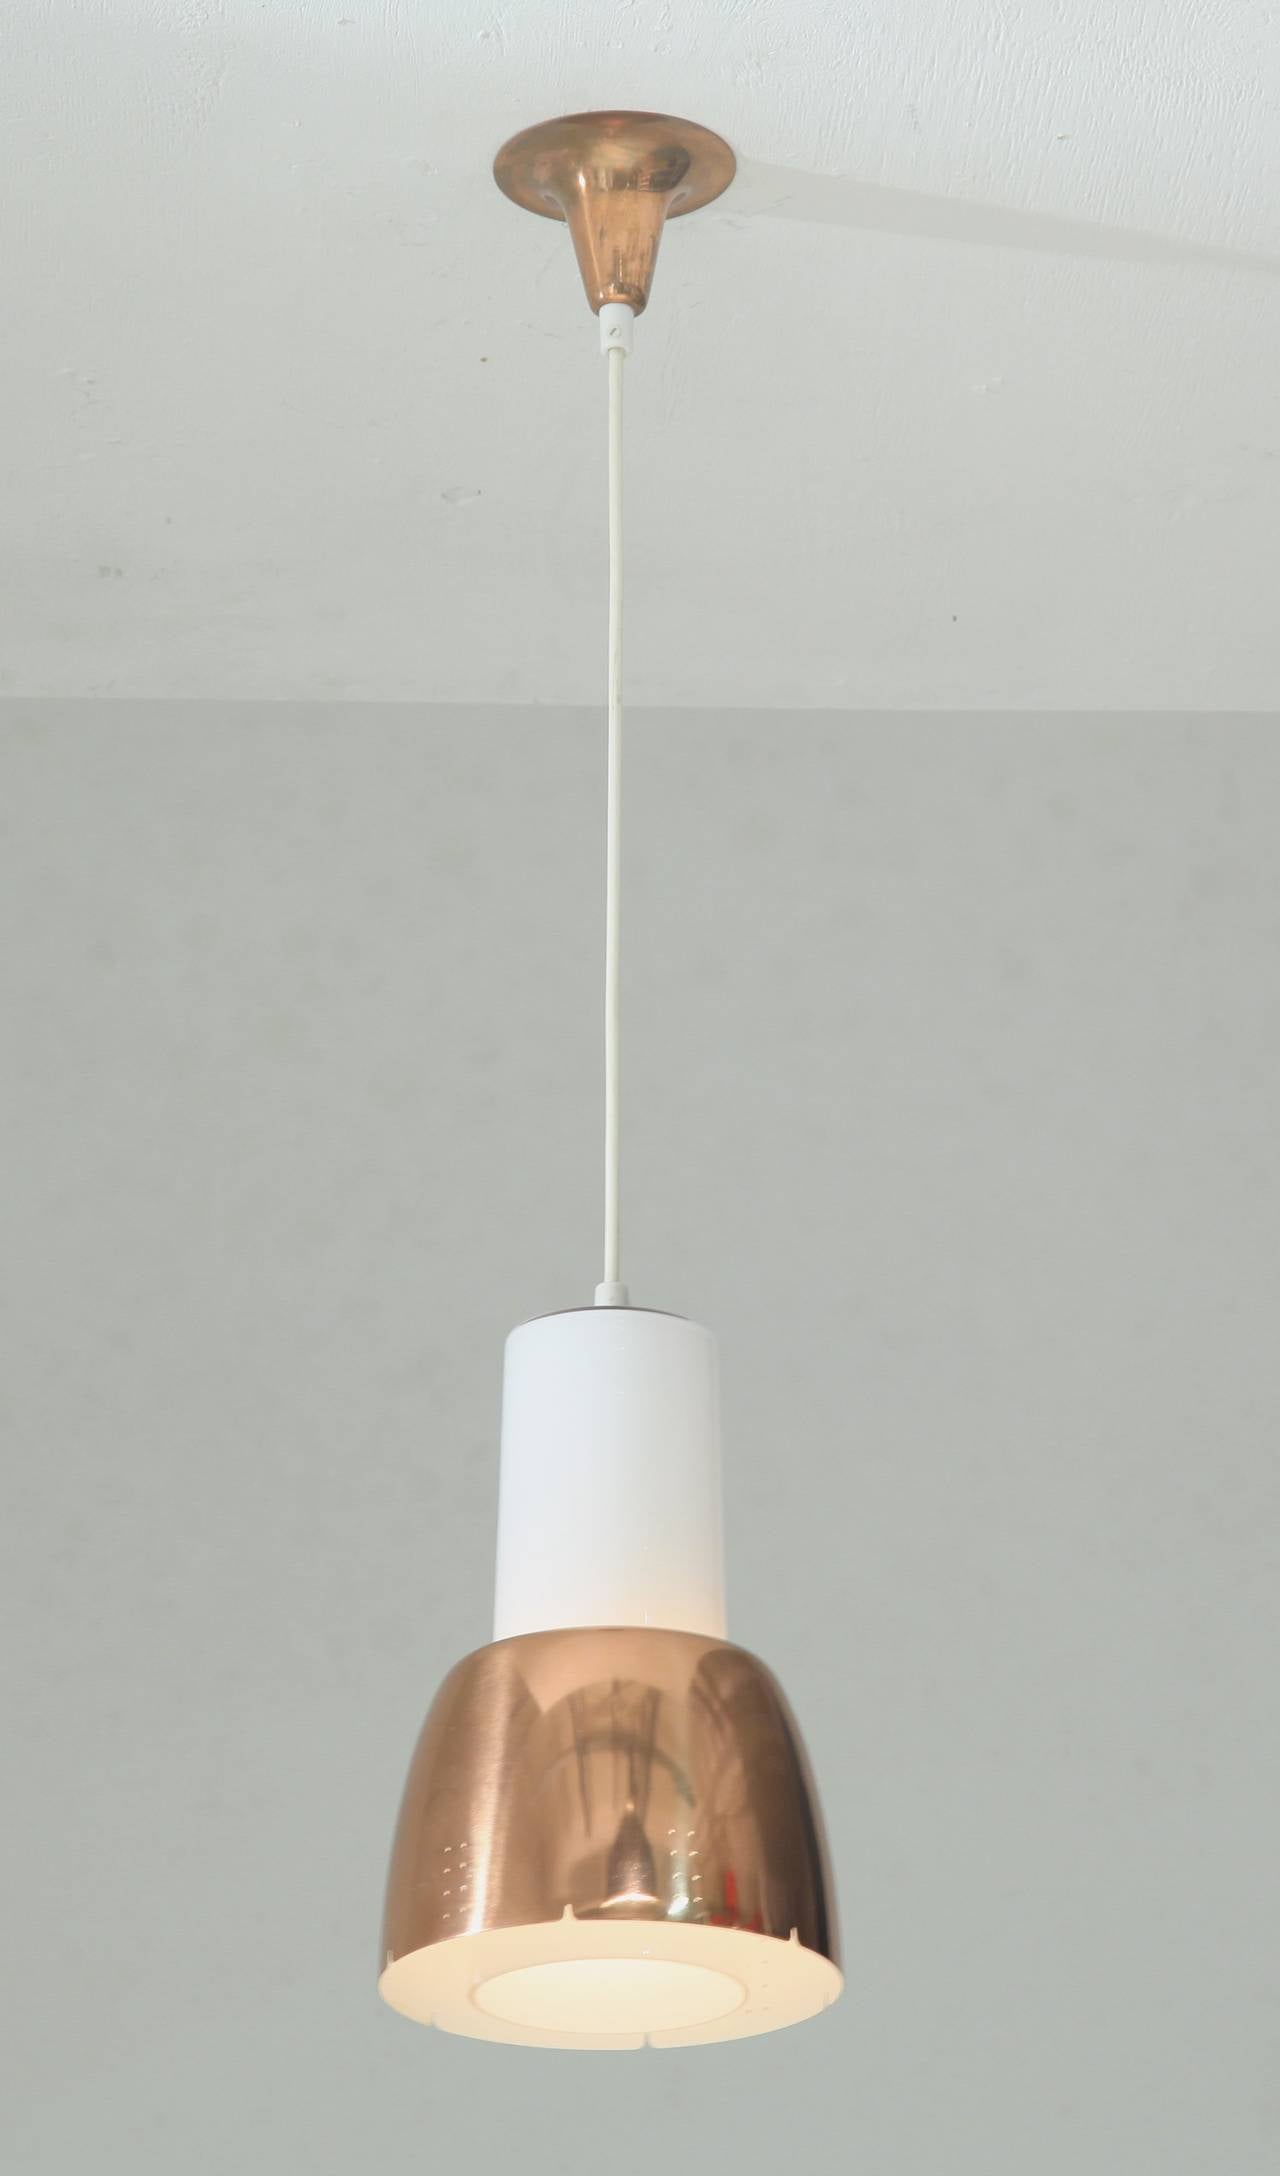 A model K2-16 pendant lamp by Paavo Tynell for Idman. The lamp has an opaline glass cylinder diffuser with an elegant copper shade with twin dot perforations.
The lamp is marked by Idman and in a perfect condition.